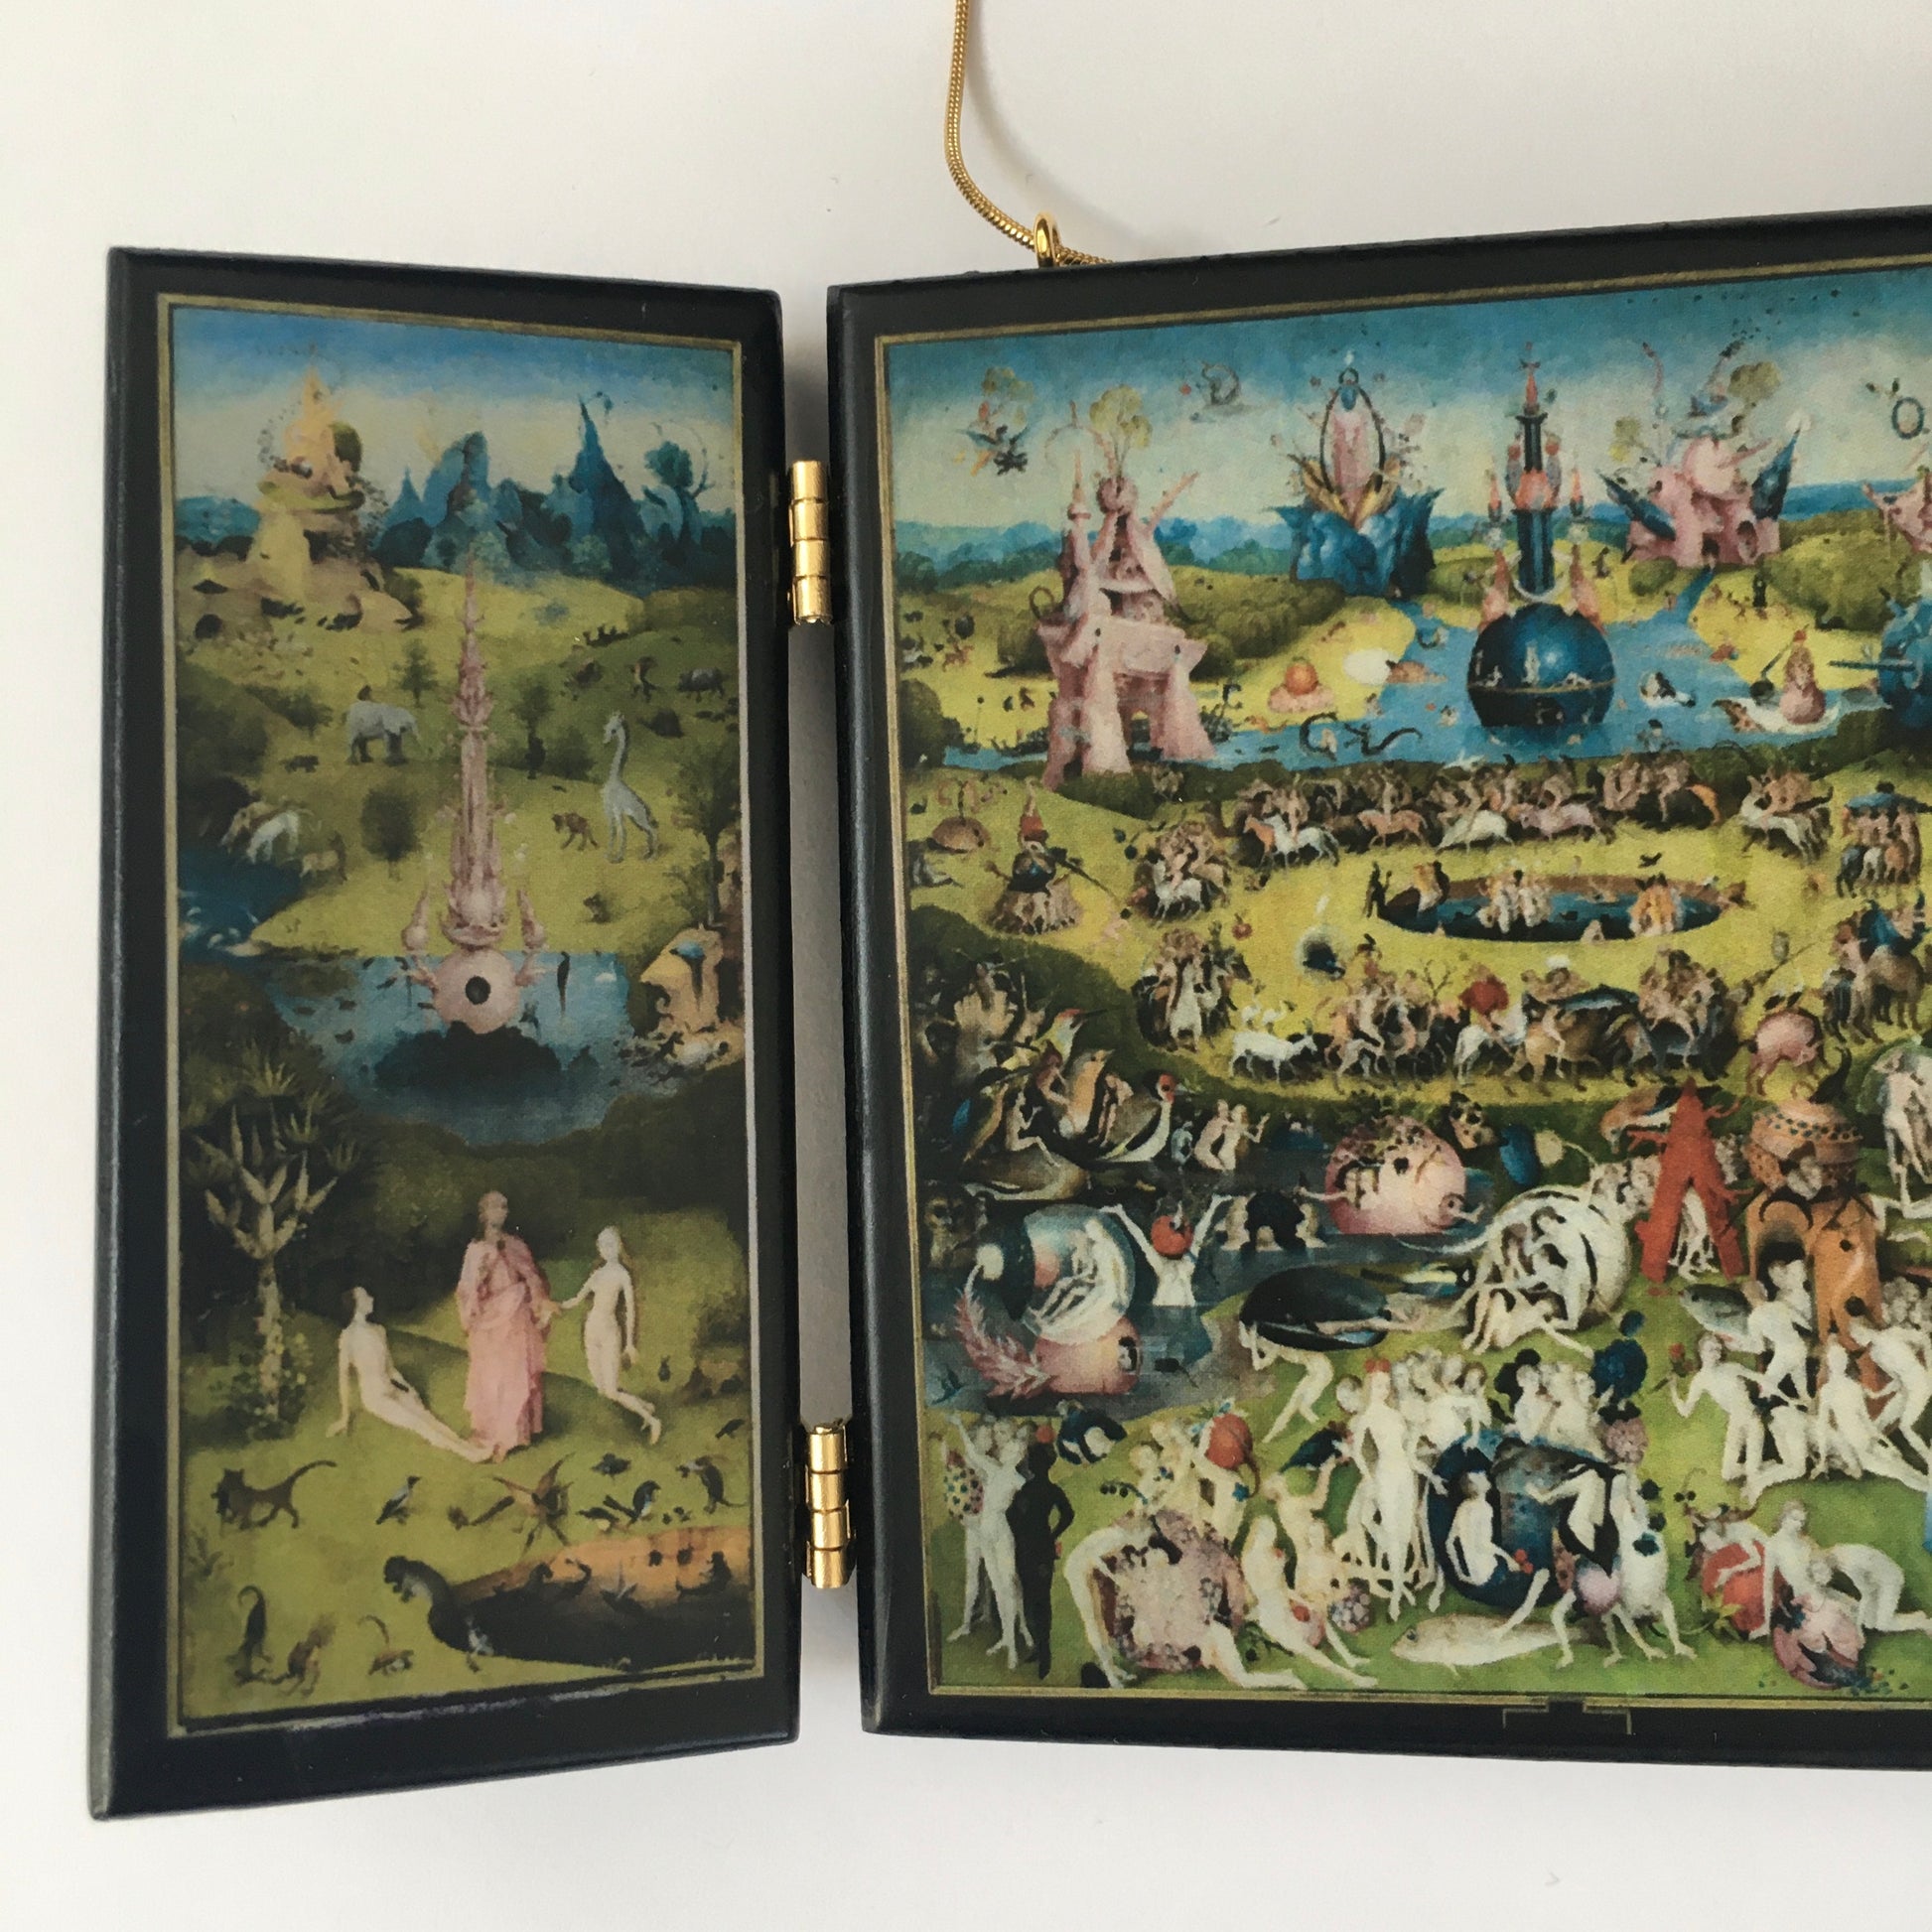 A fully functioning, reproduction in miniature of the three panelled masterpiece, Garden of Earthly Delights by Hieronymus Bosch, turned into a beguiling necklace. 